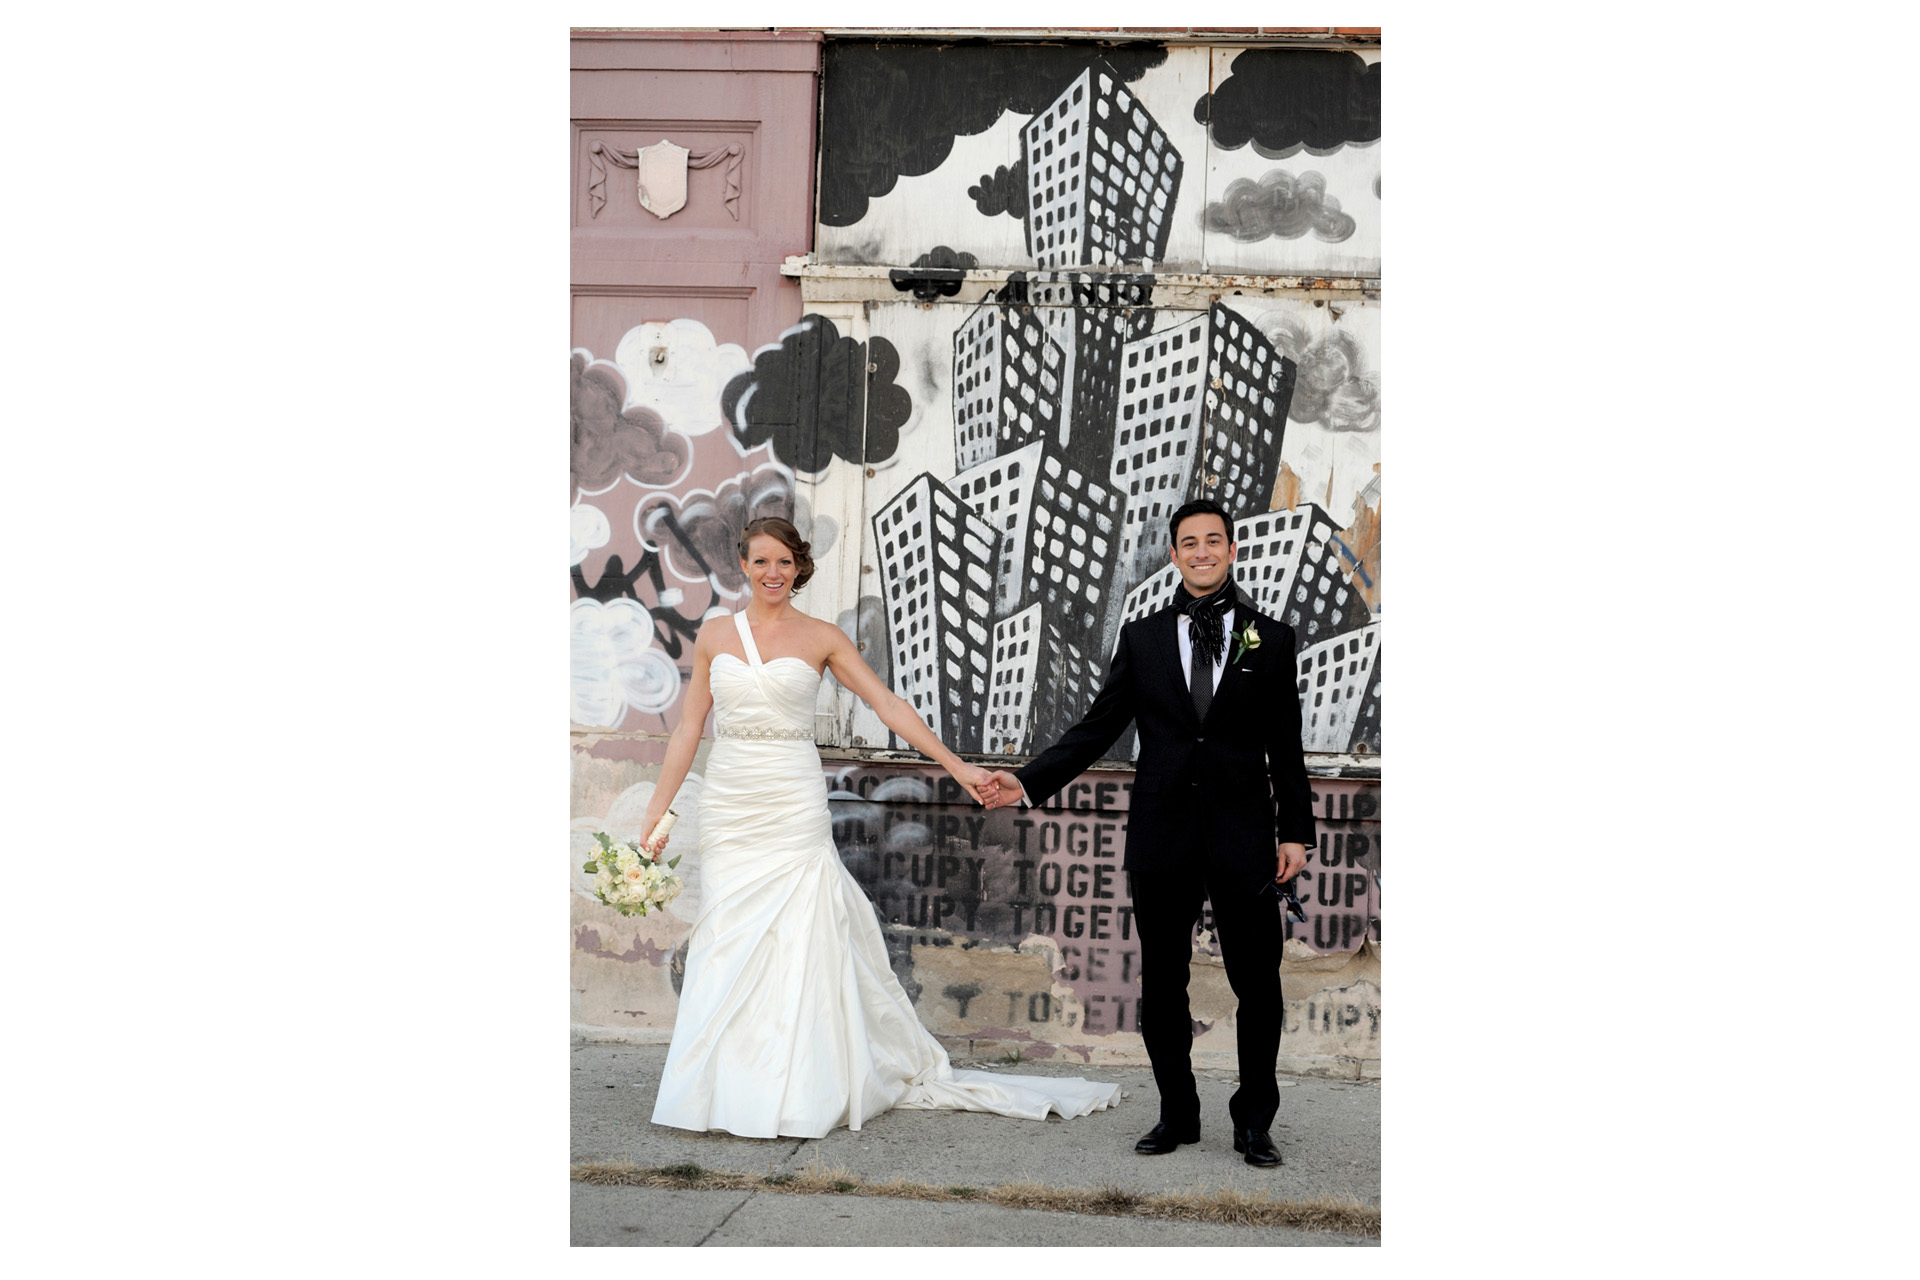 The Historic church Sweetest Heart of Mary and the Dearborn Inn of Detroit's historic church in Detroit and Dearborn, Michigan wedding photographer's photo of the couple near the Detroit's historic train station for wedding photos in Detroit, Michigan with local graffiti art.